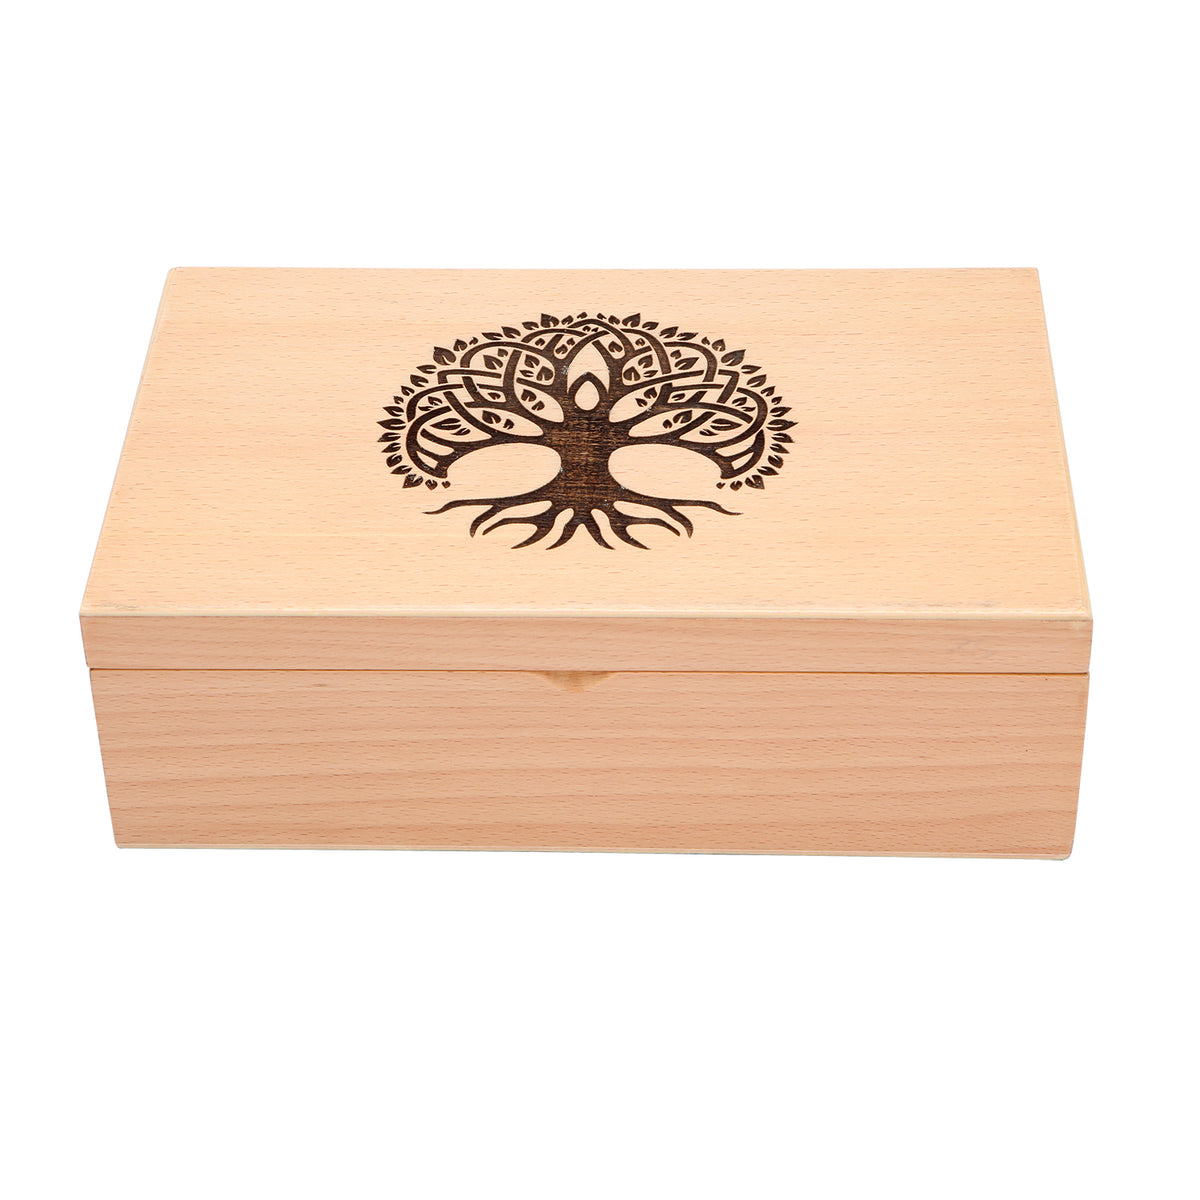 Wood Box Multiutility Carved Tree Of Life Motif On Top | Wood Boxes